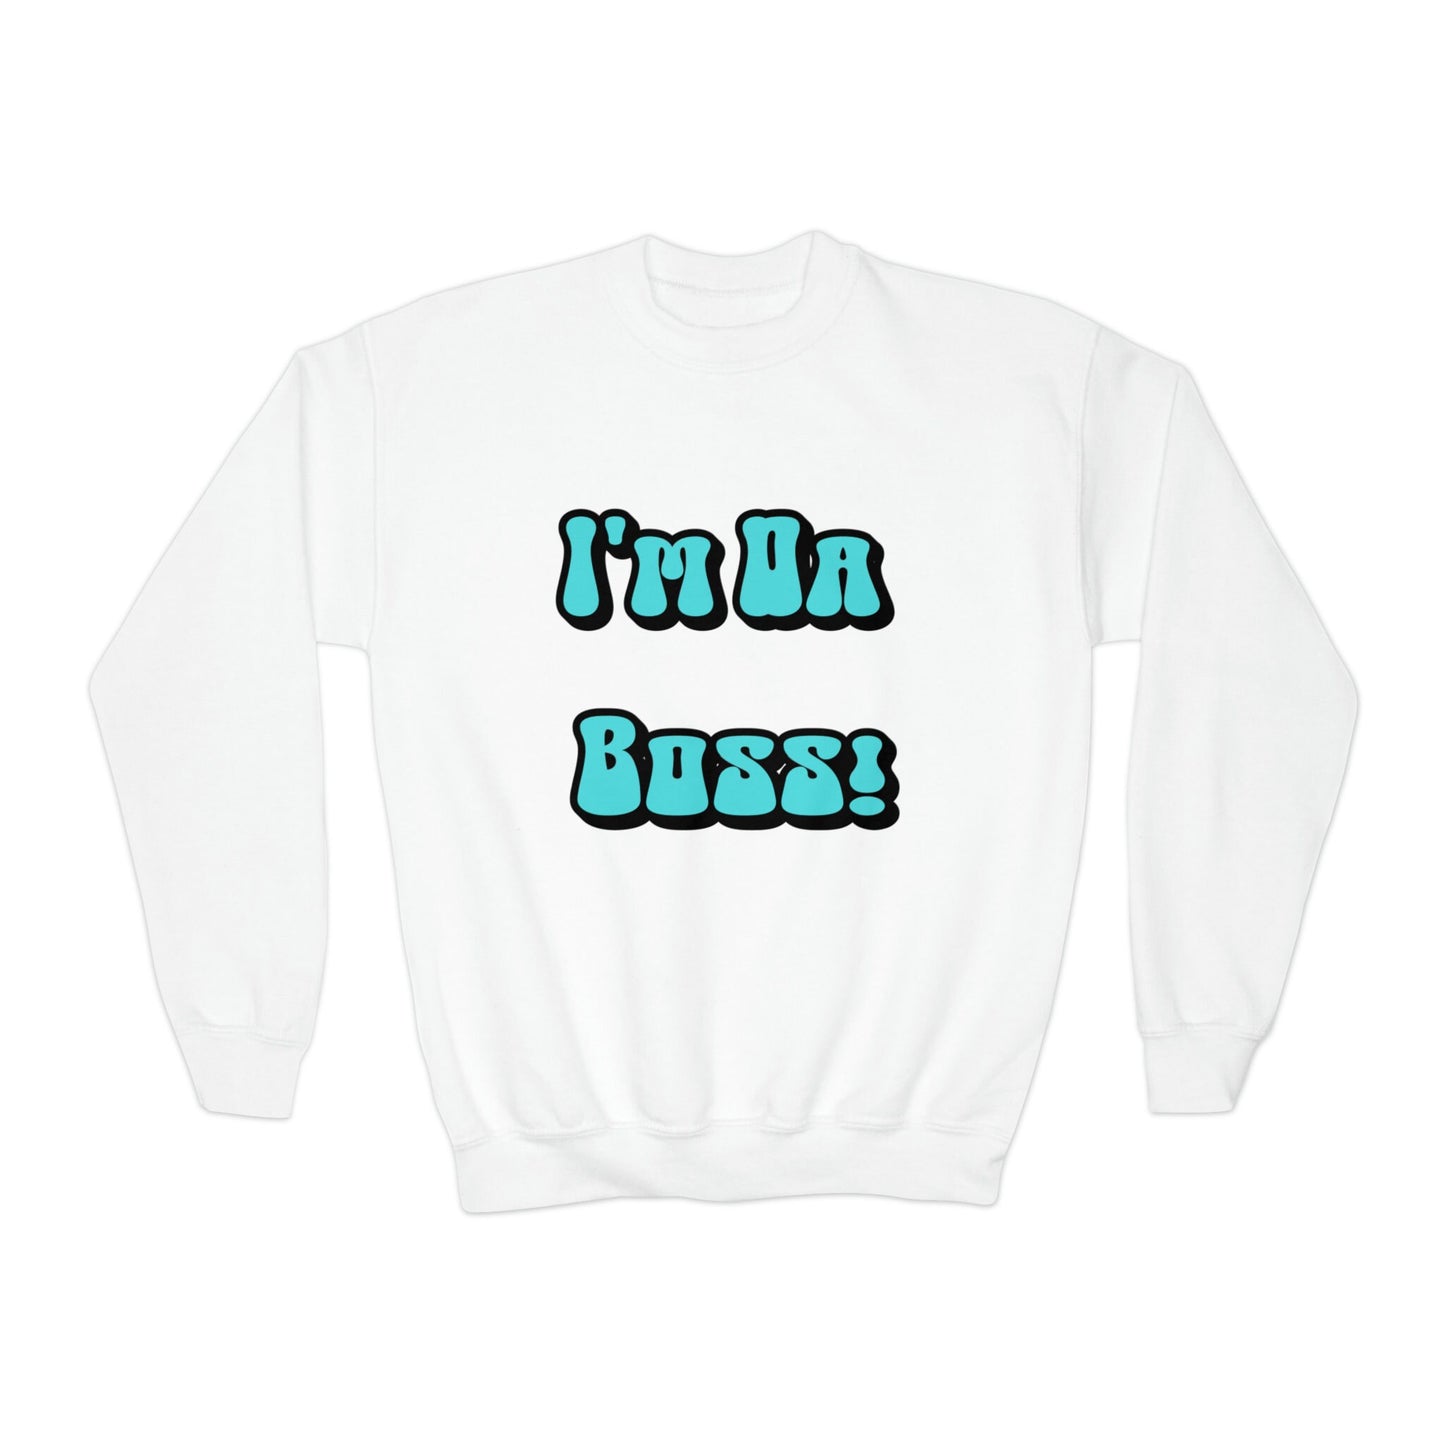 Kids Rule With This 'I Am The Boss' Crewneck Sweatshirt